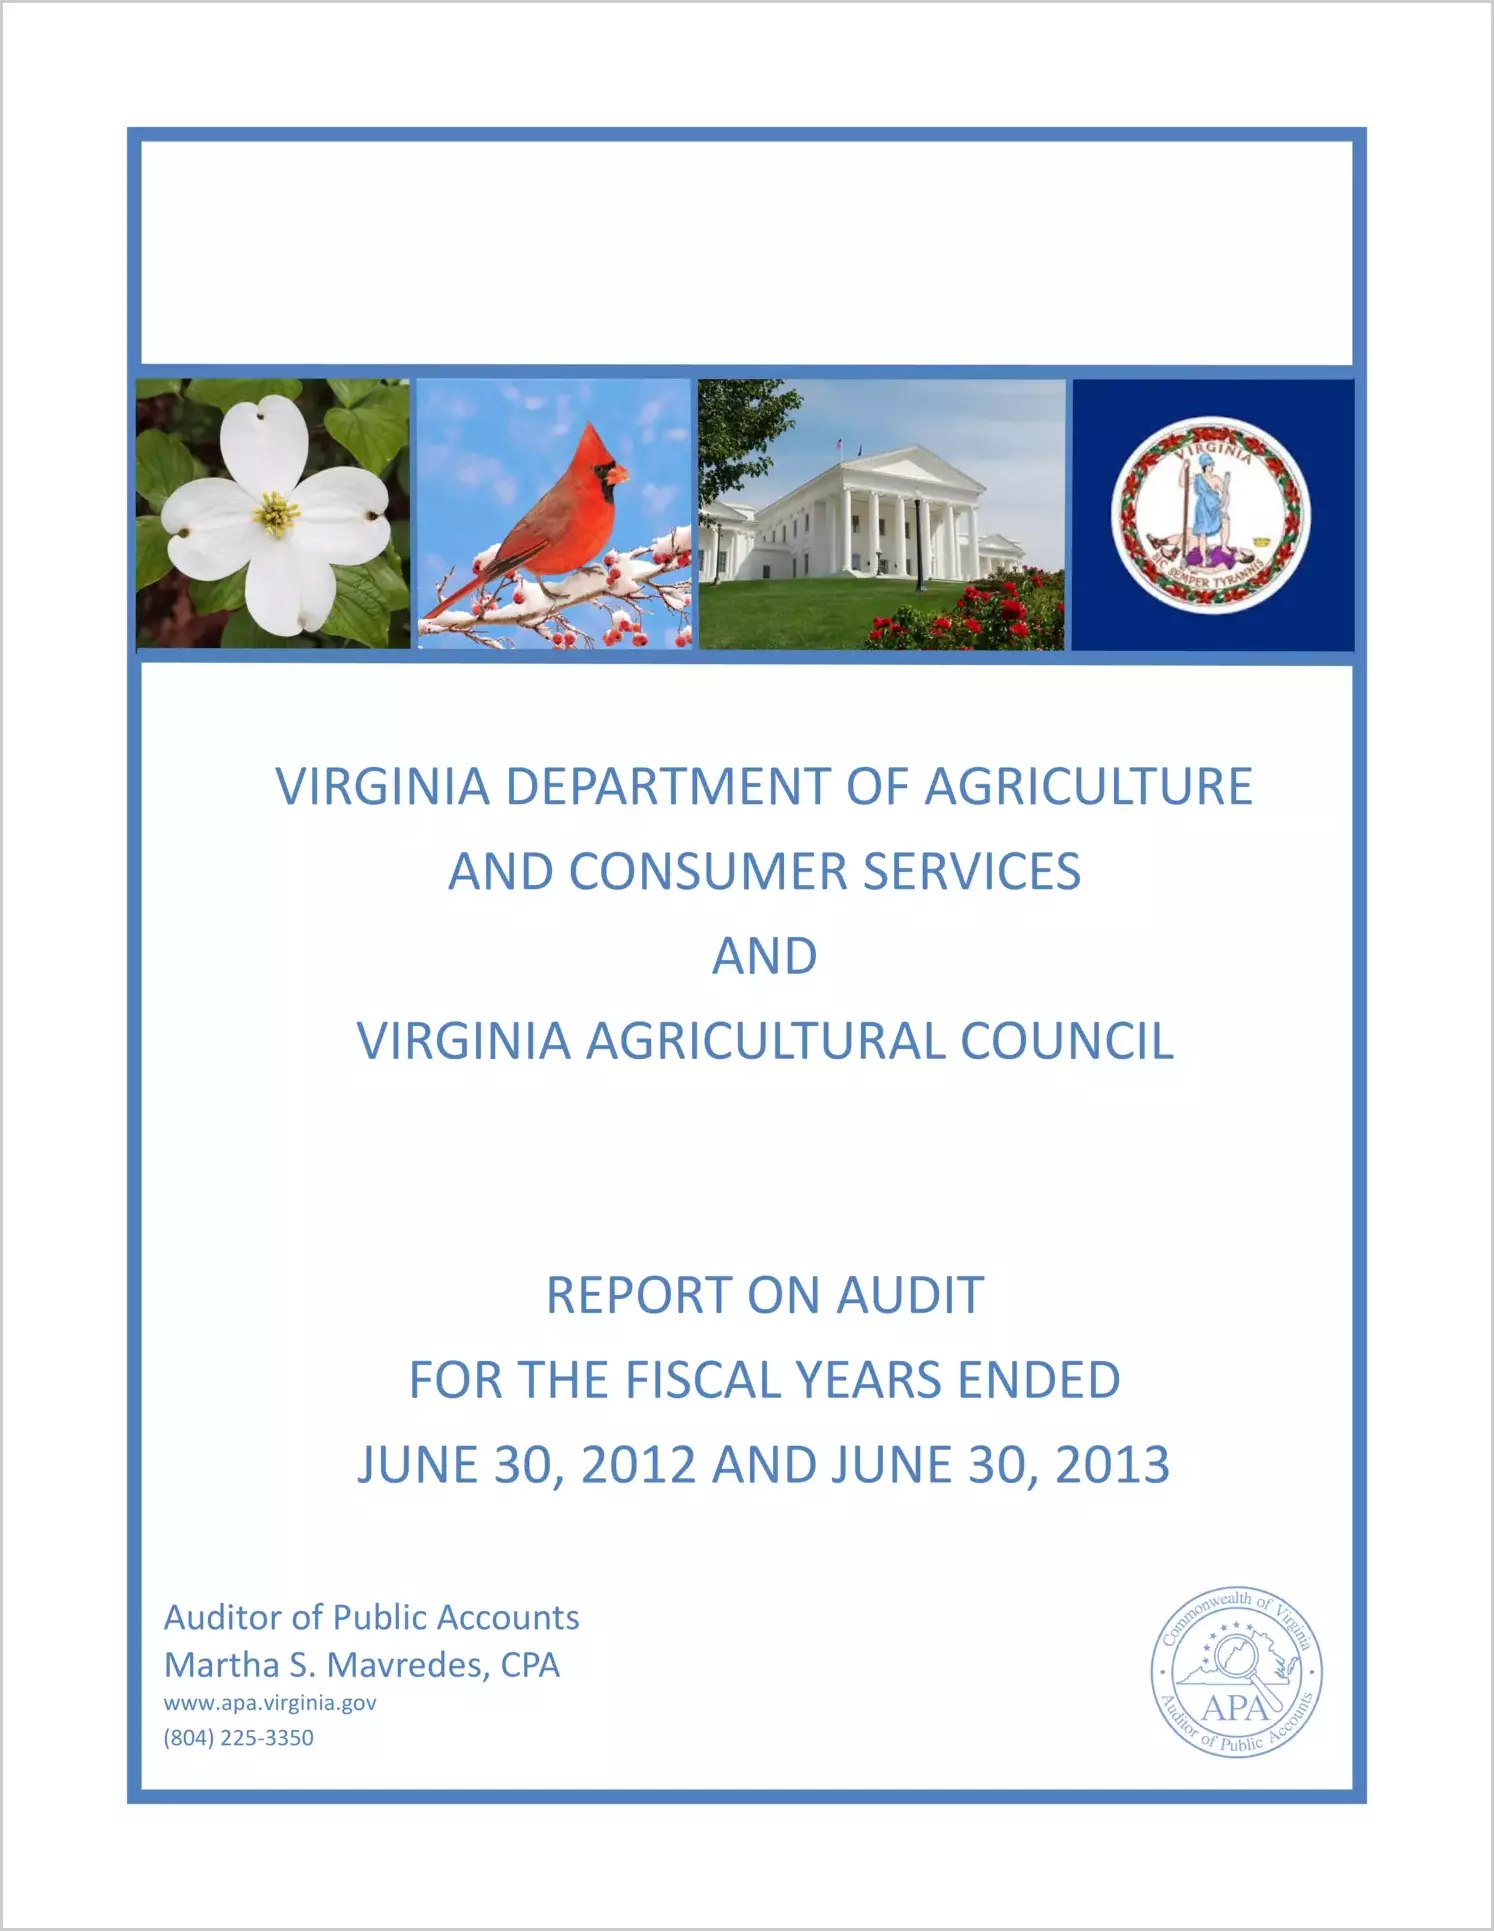 Virginia Department of Agriculture and Consumer Services and Virginia Agricultural Council for the years ended June 30, 2012 and June 30, 2013